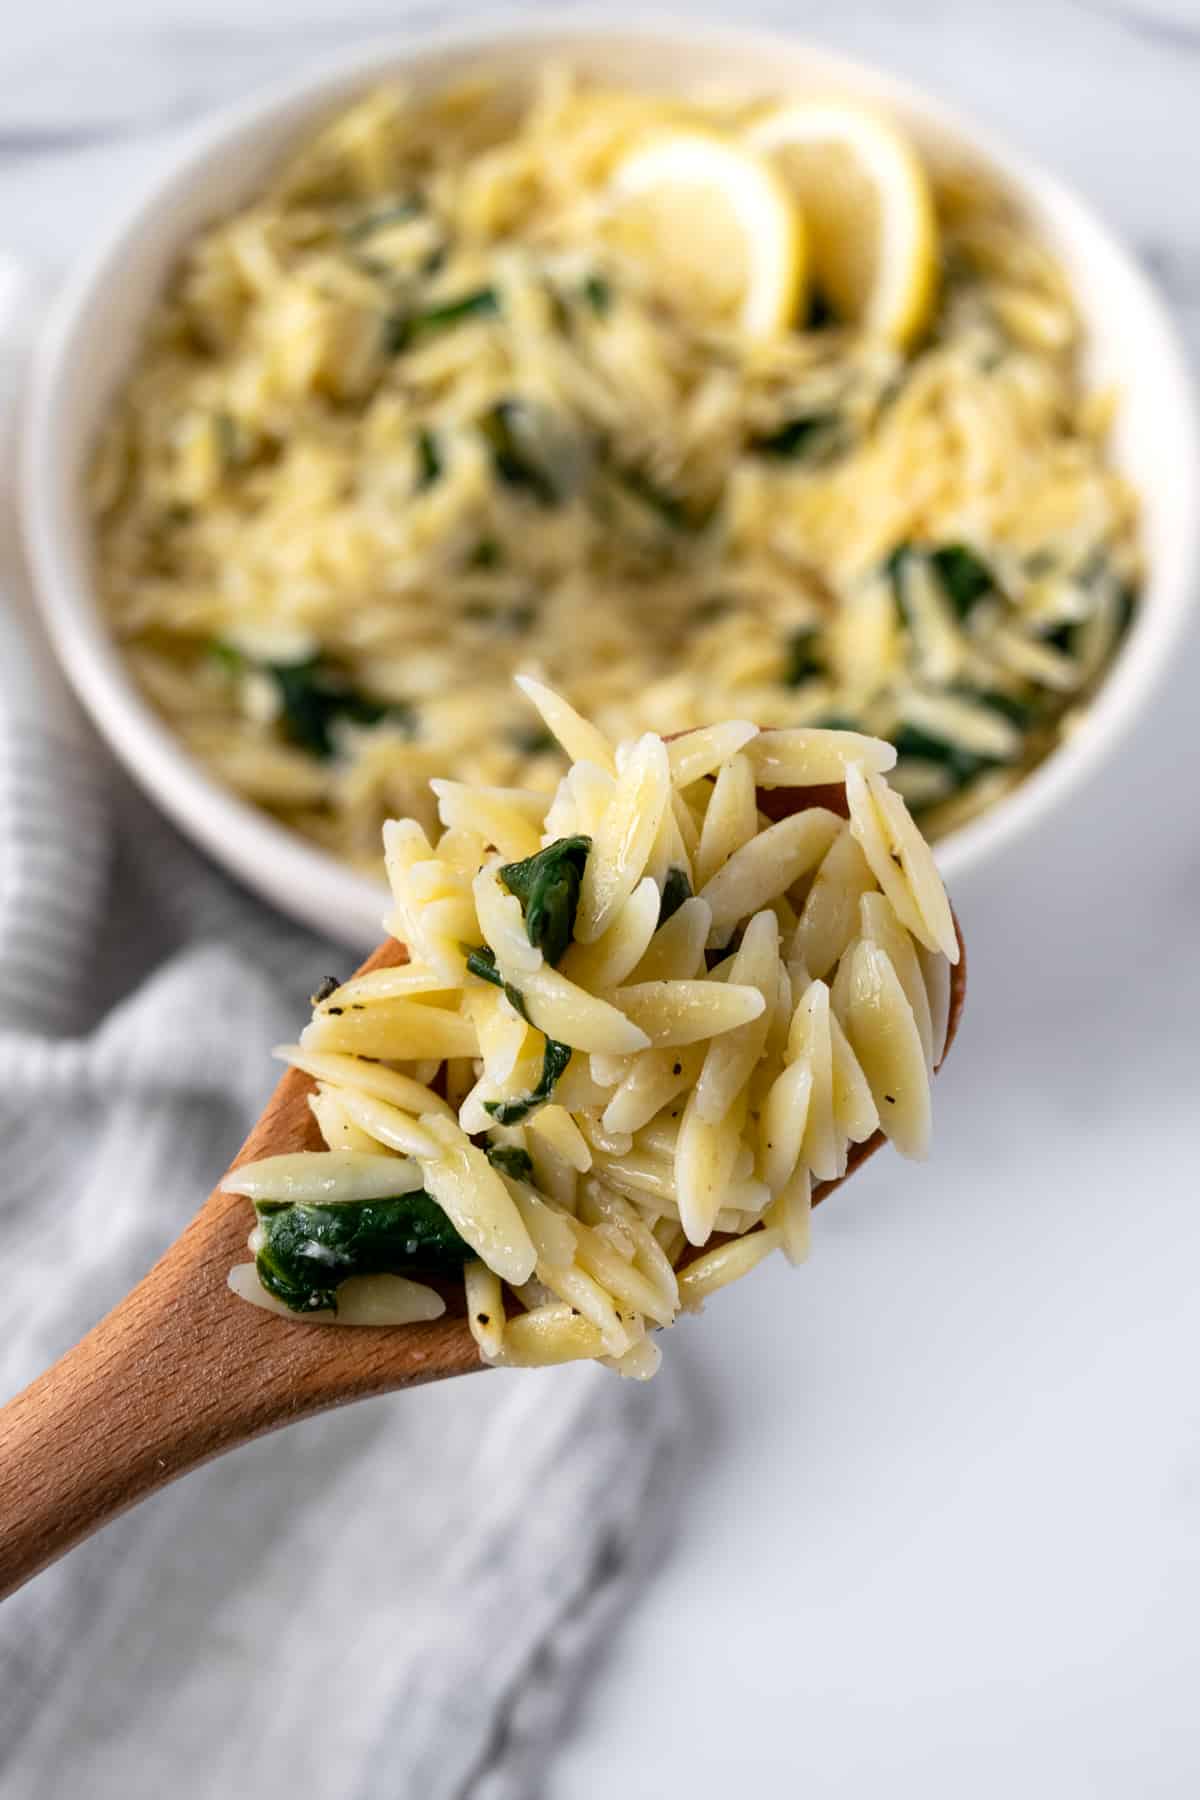 Lemon Orzo with Spinach on a wooden spoon.